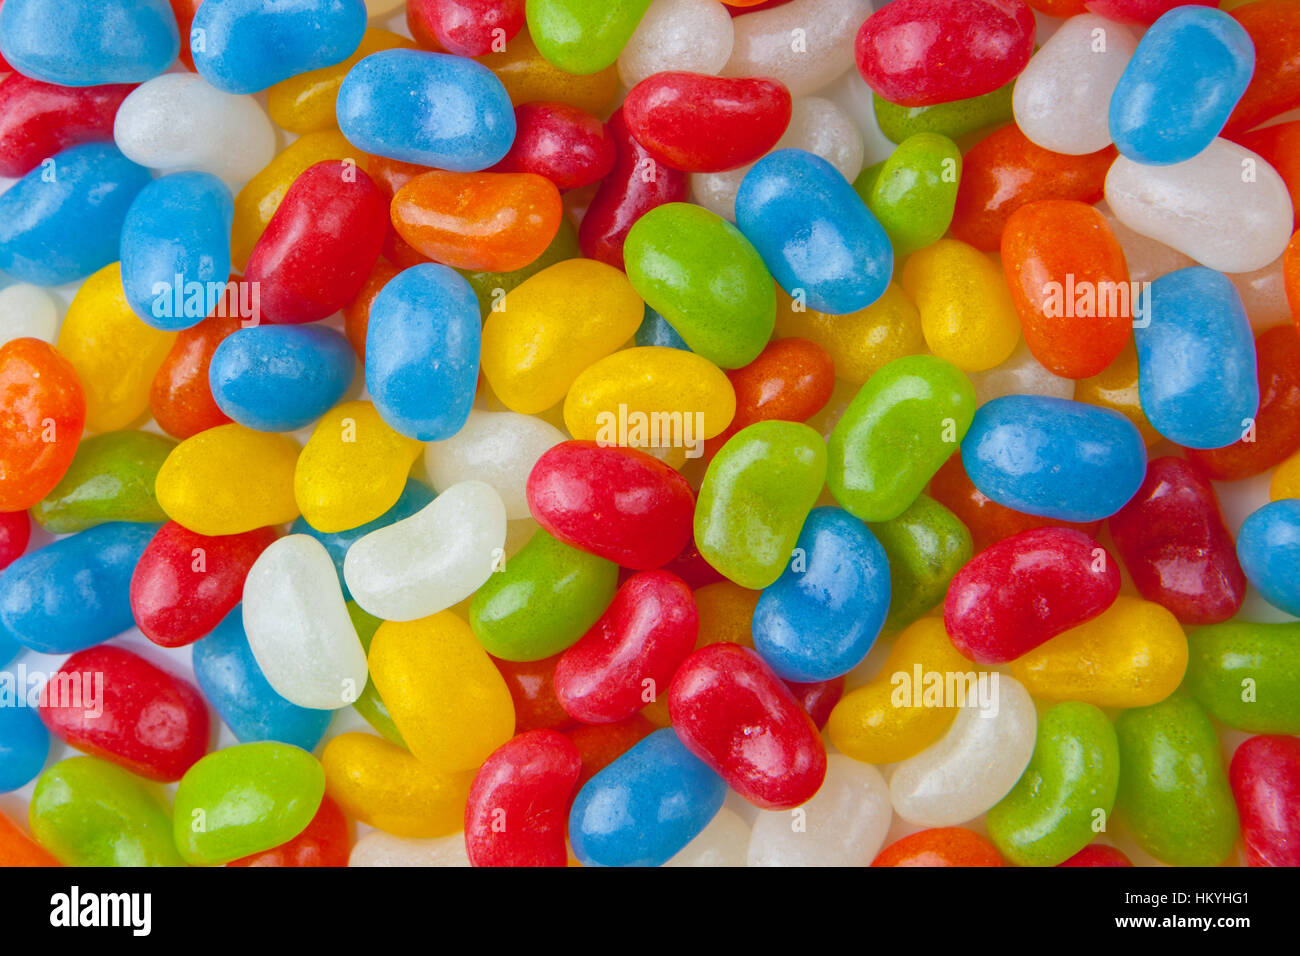 Colorful jelly beans candy sweets Stock Photo